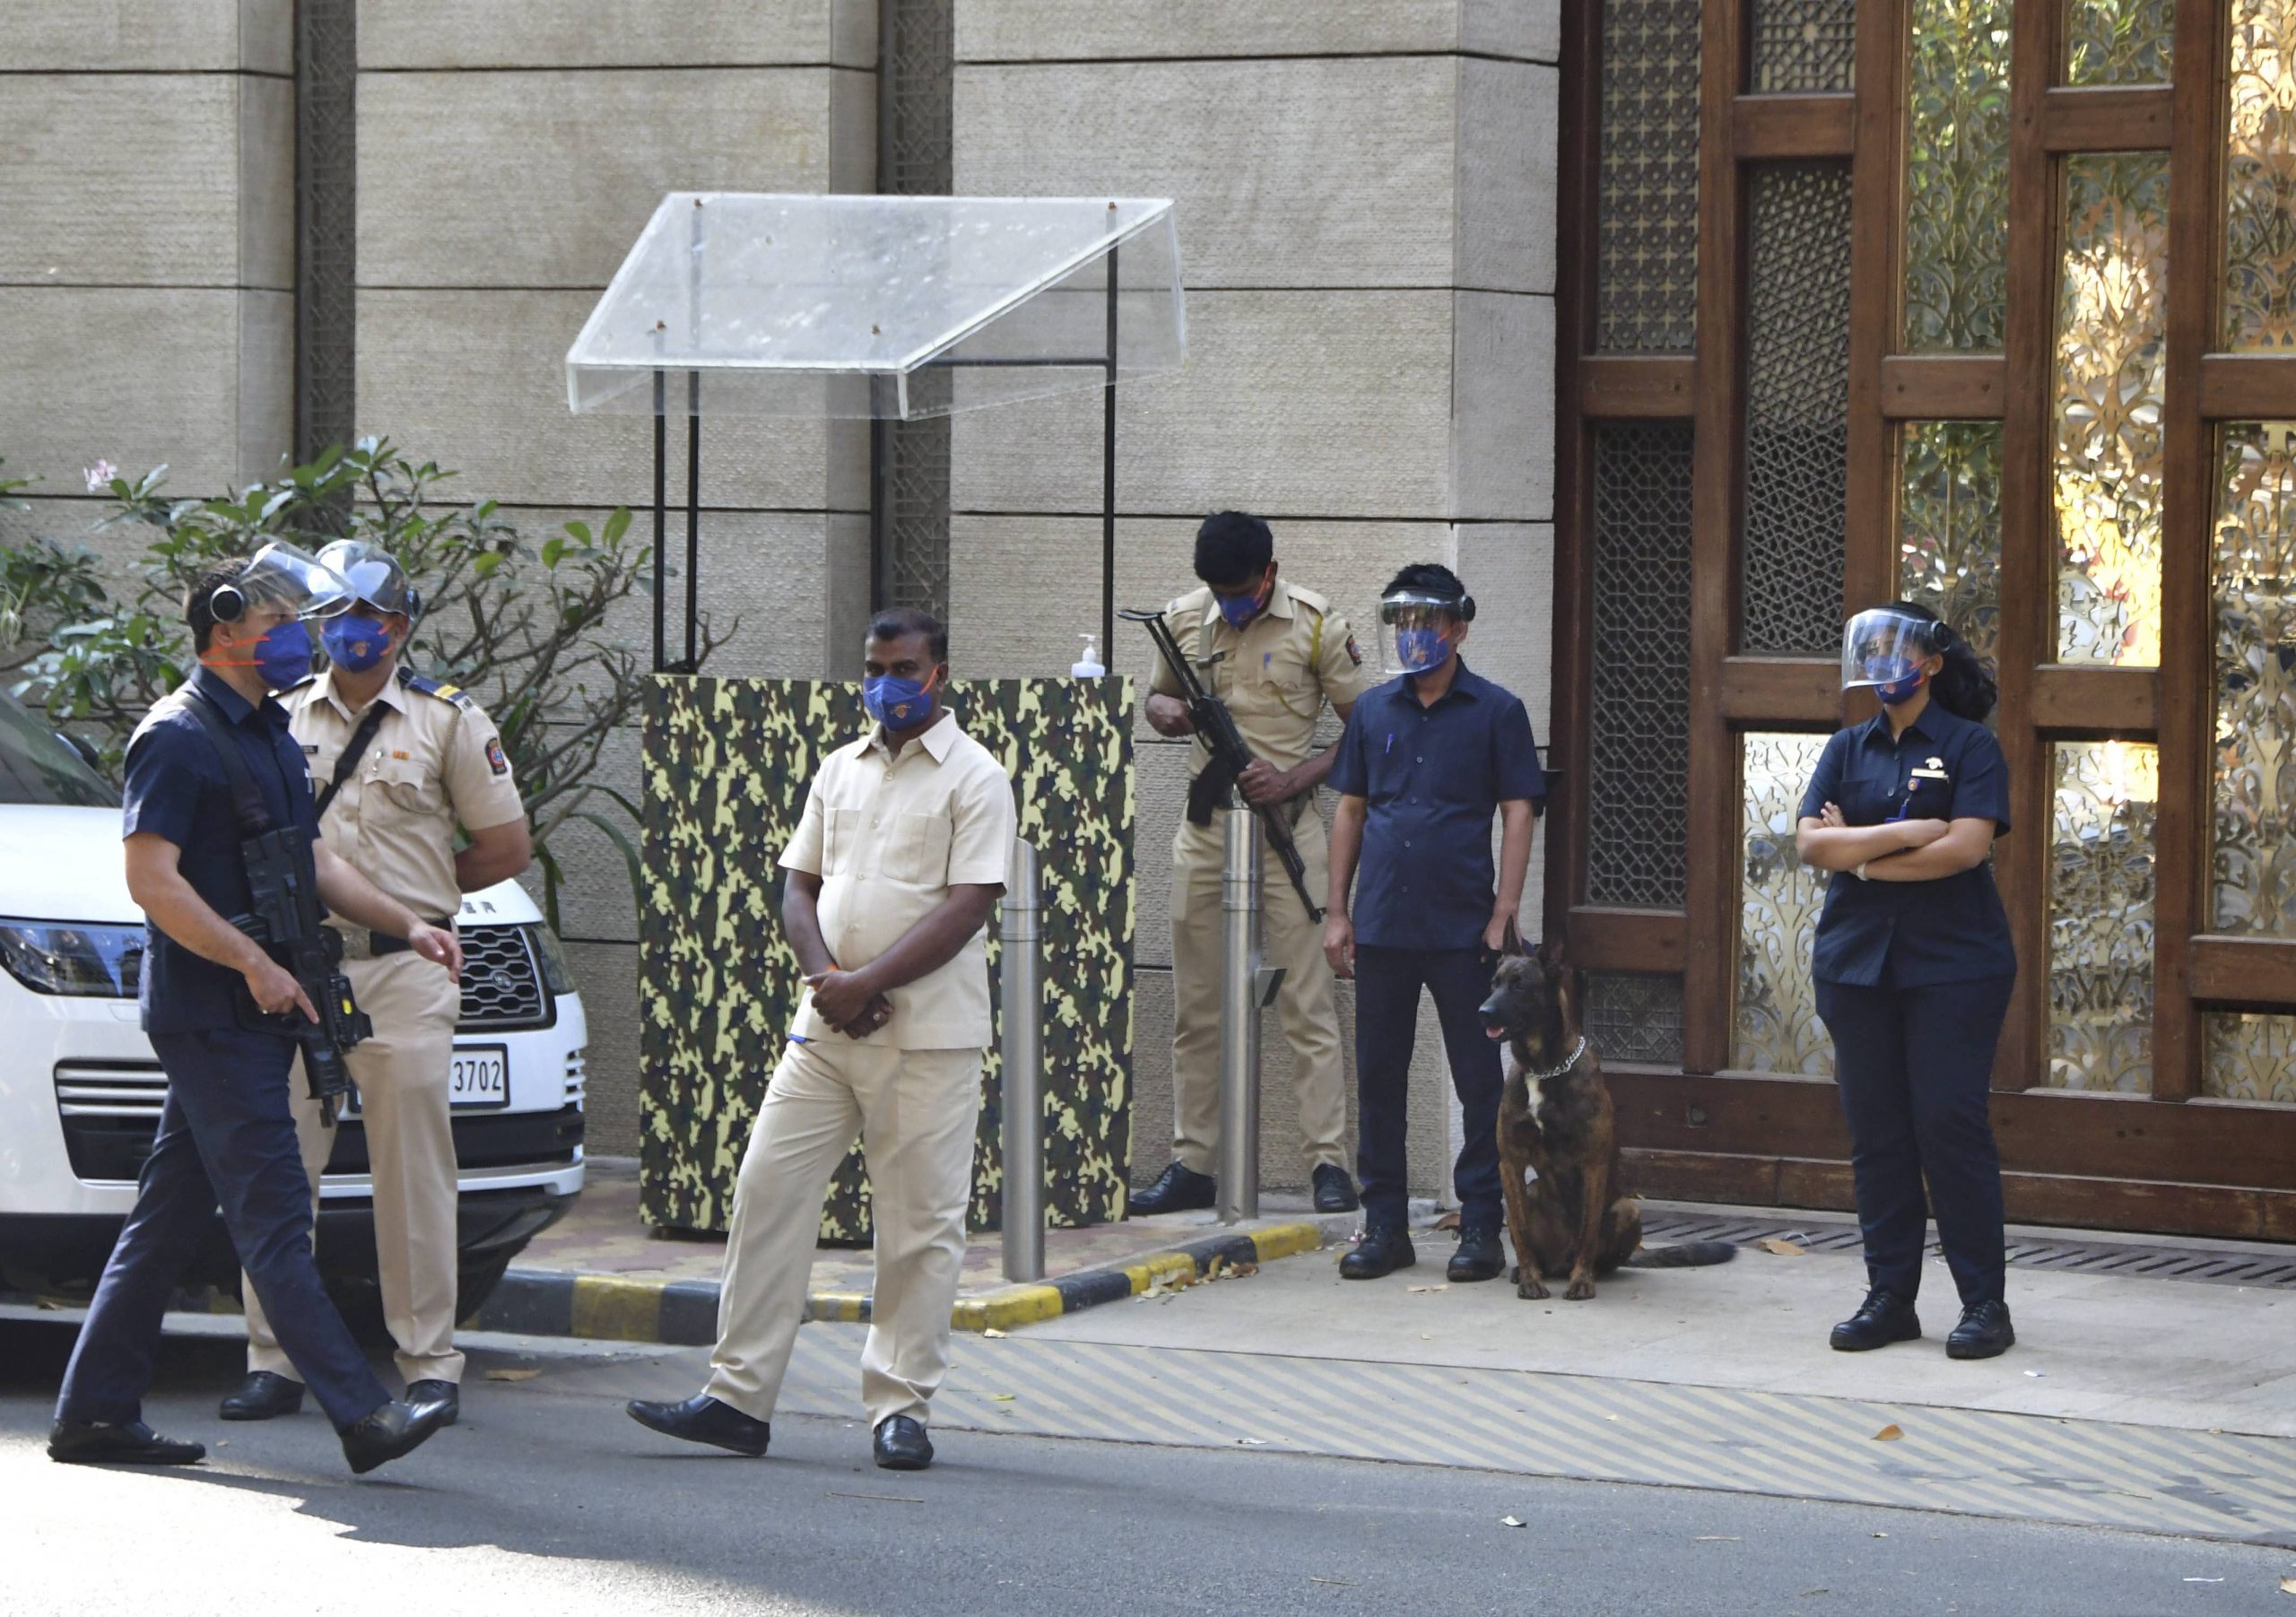 Mansukh Hiren, owner of SUV found with explosives outside Mukesh Ambani’s home, dies by suicide: Police